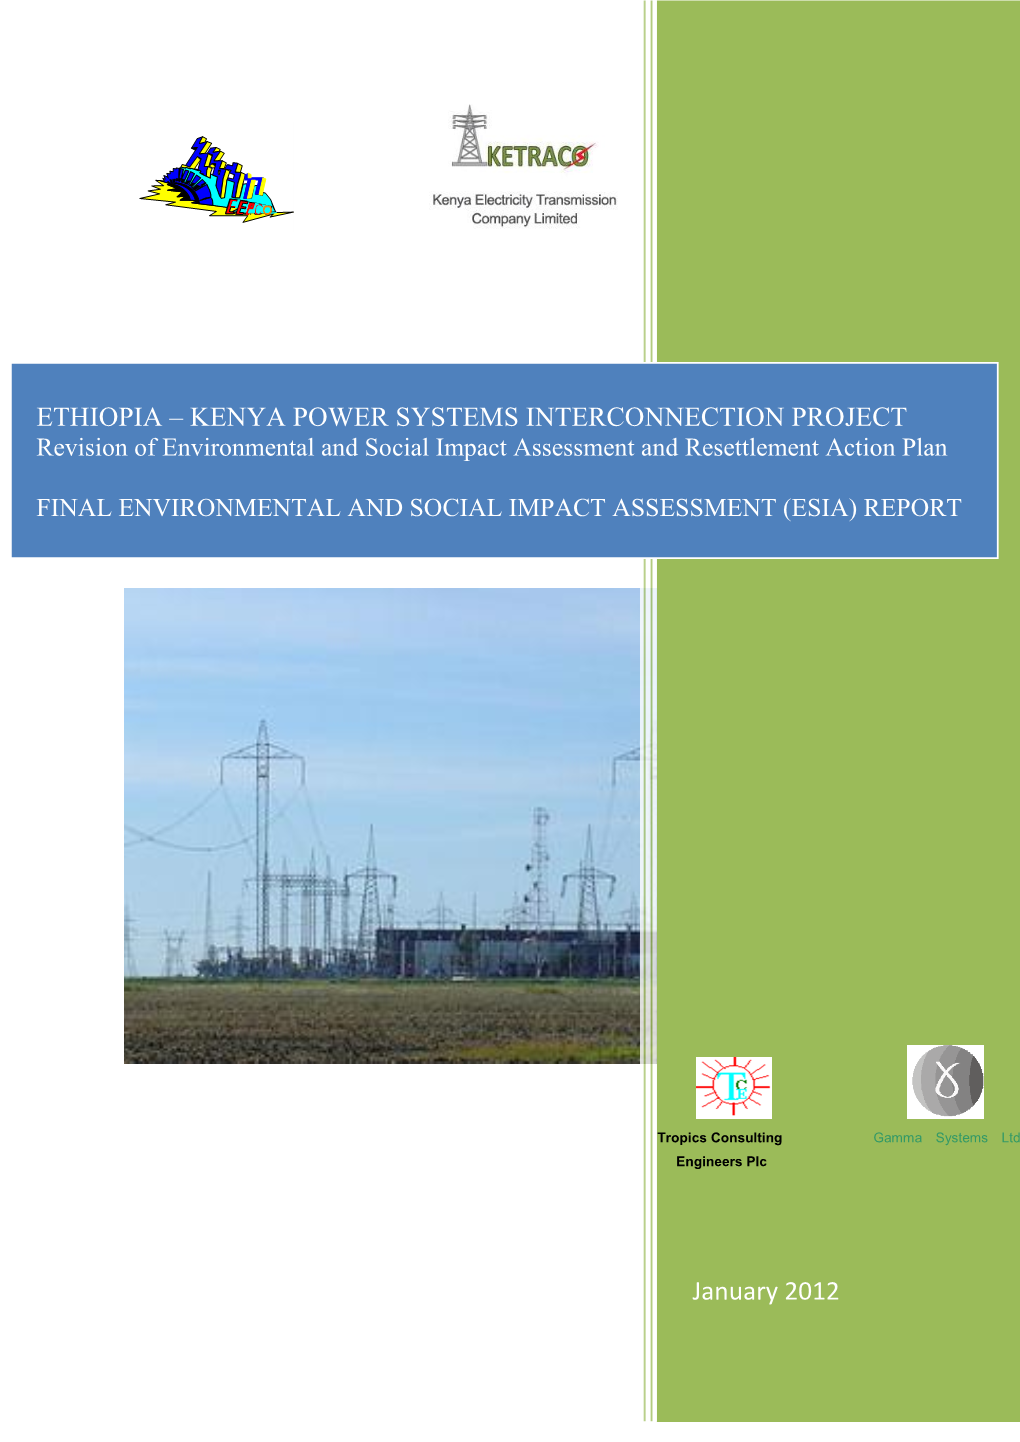 KENYA POWER SYSTEMS INTERCONNECTION PROJECT Revision of Environmental and Social Impact Assessment and Resettlement Action Plan